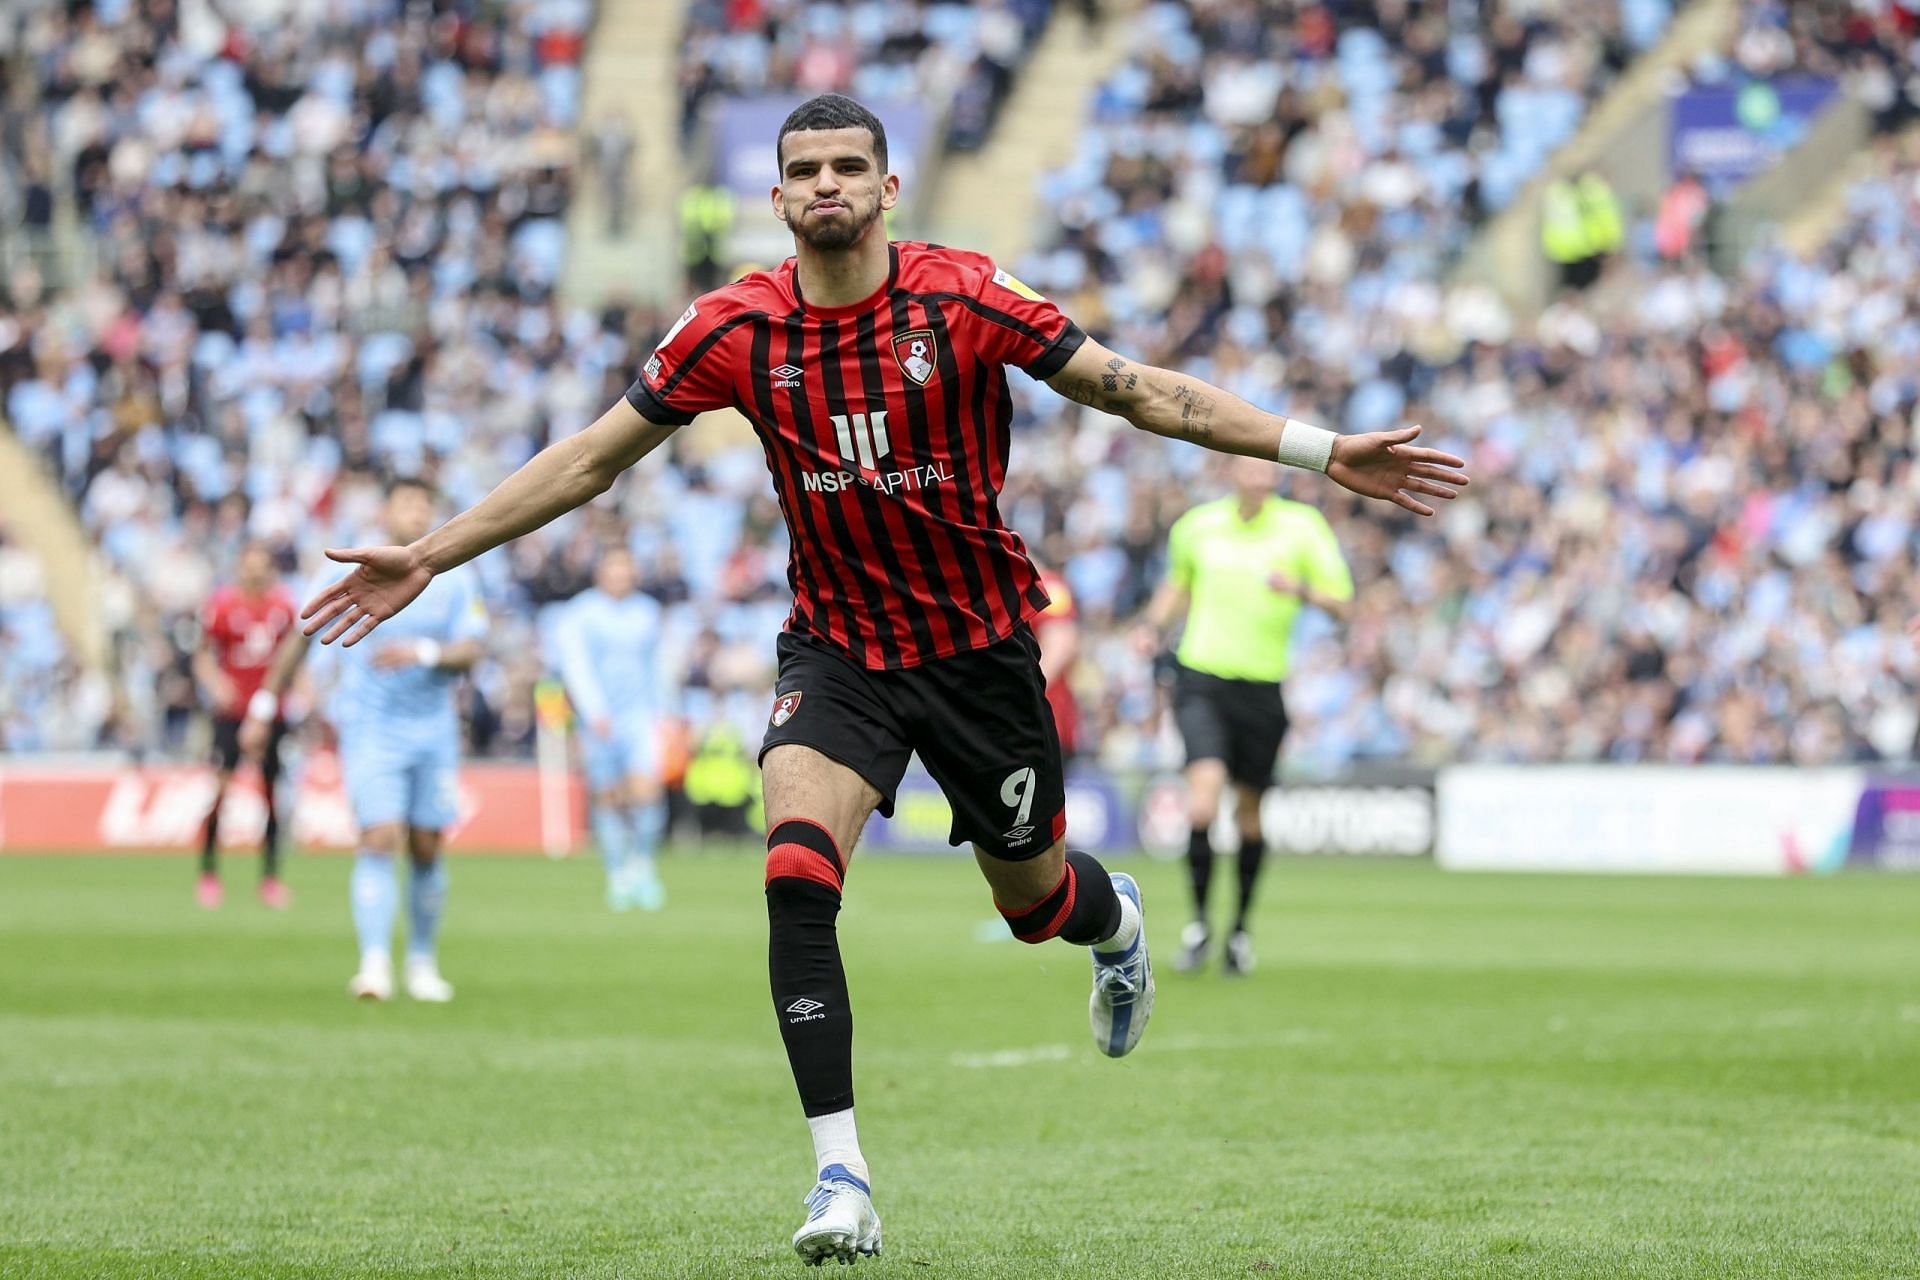 Solanke was one of the best players in the Championship last season.